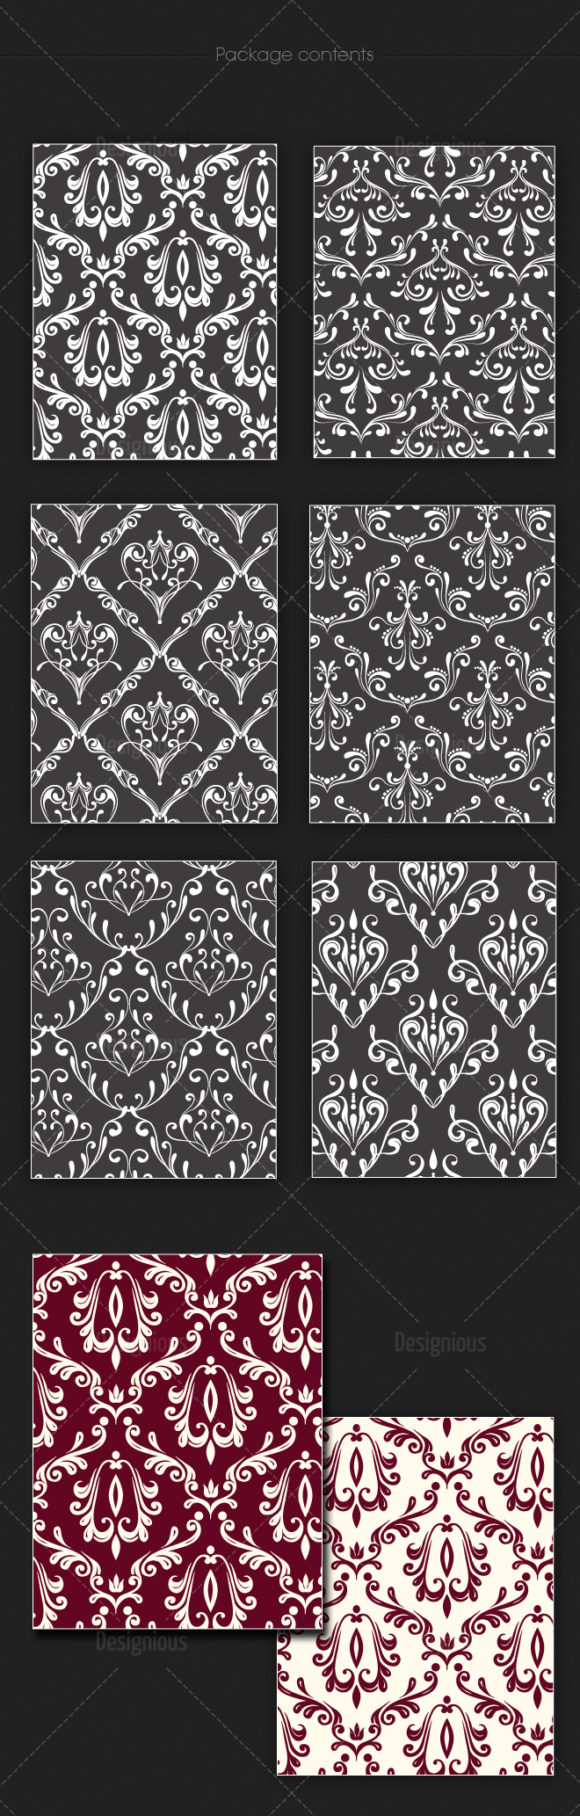 Seamless Patterns Vector Pack 124 2